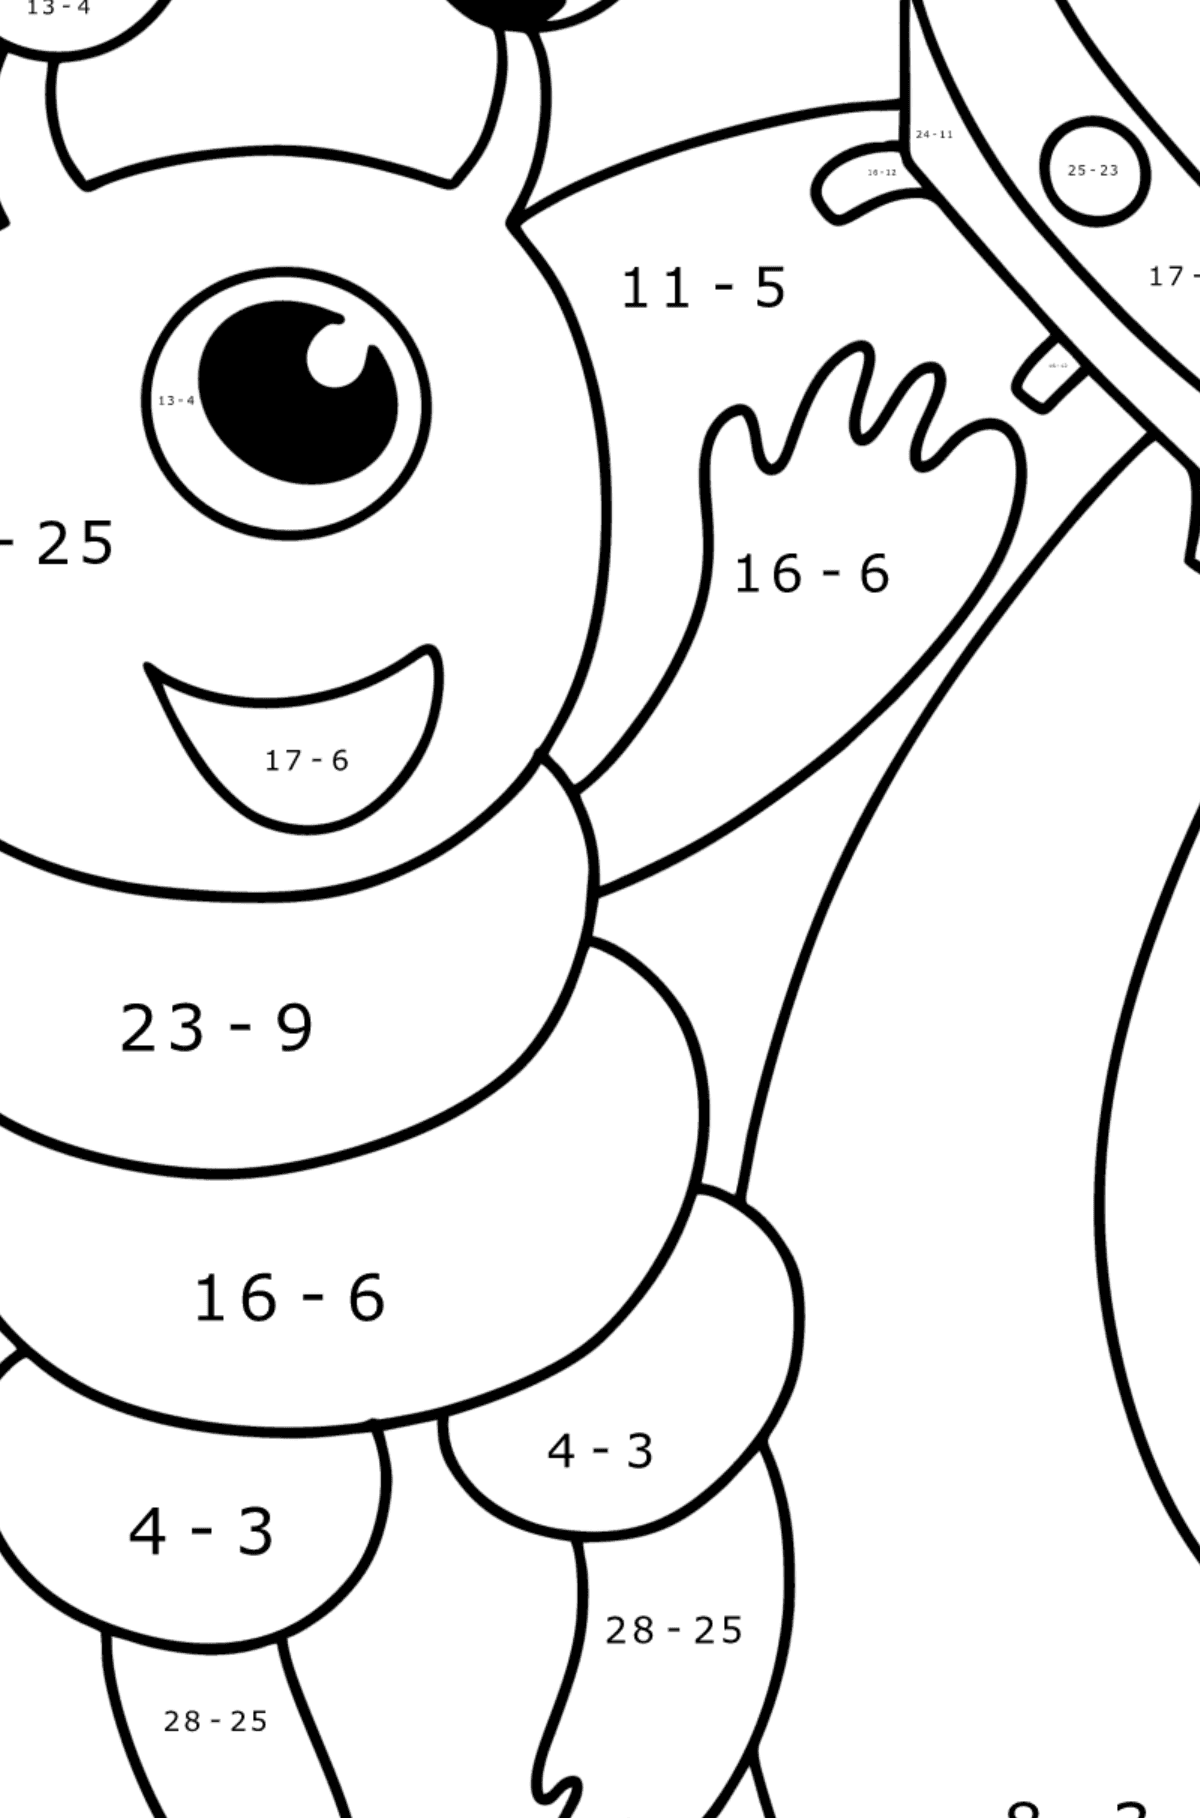 Alien in space coloring page - Math Coloring - Subtraction for Kids